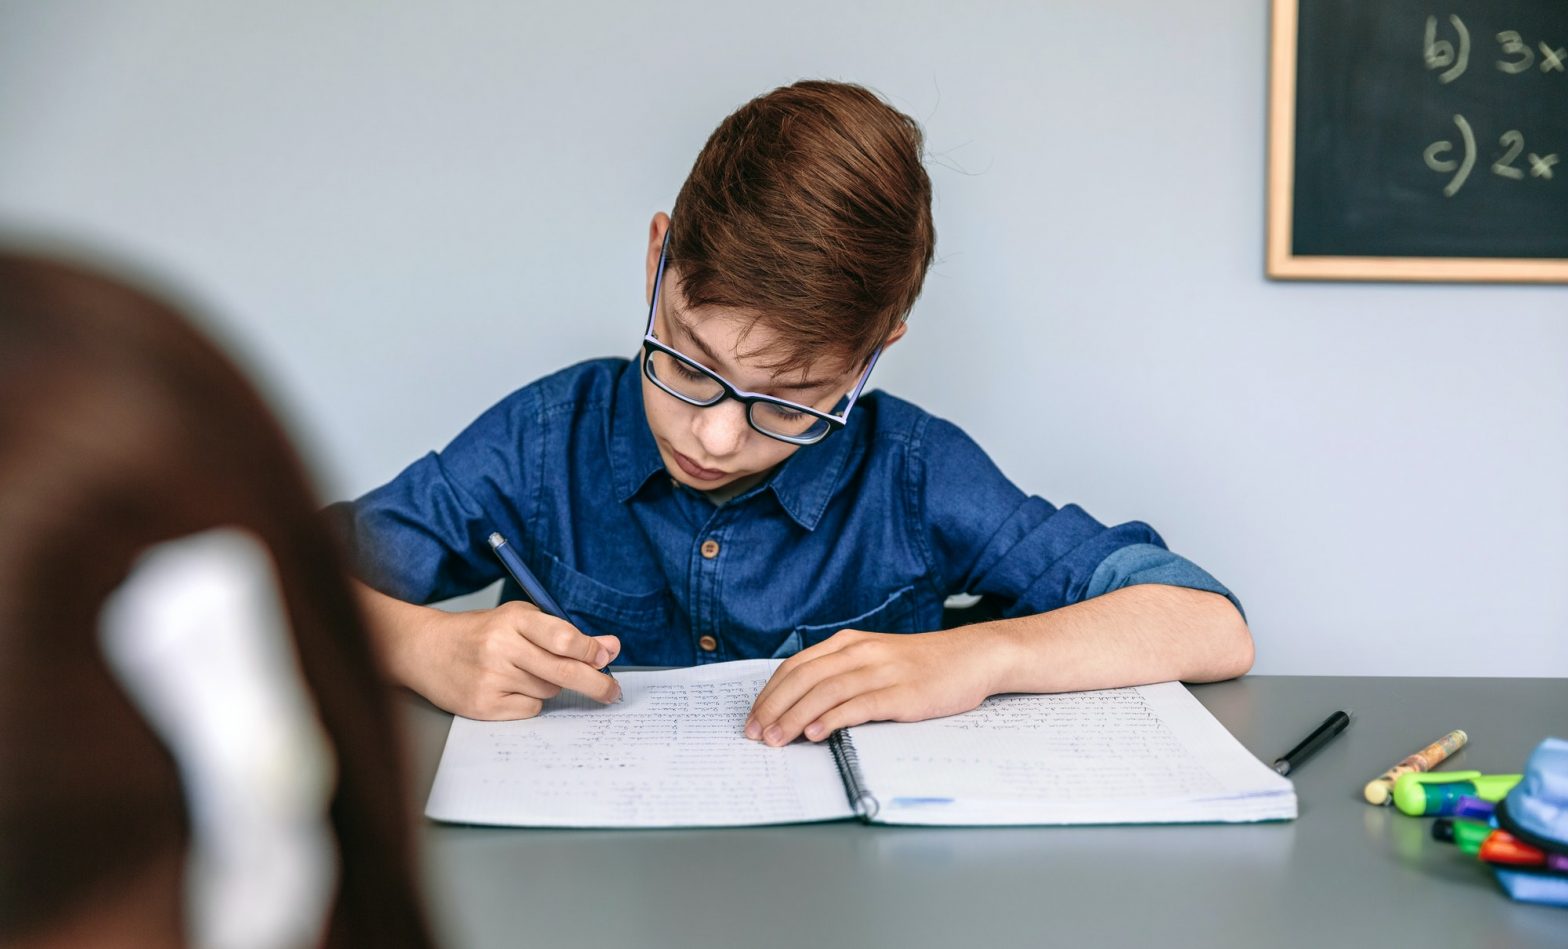 You can use this creative writing exercise to help your child write about any topic that interests them. The idea is to get their creative juices flowing, so these exercises start small (10-minute exercises) and then build up to the full-length, timed writing tasks.